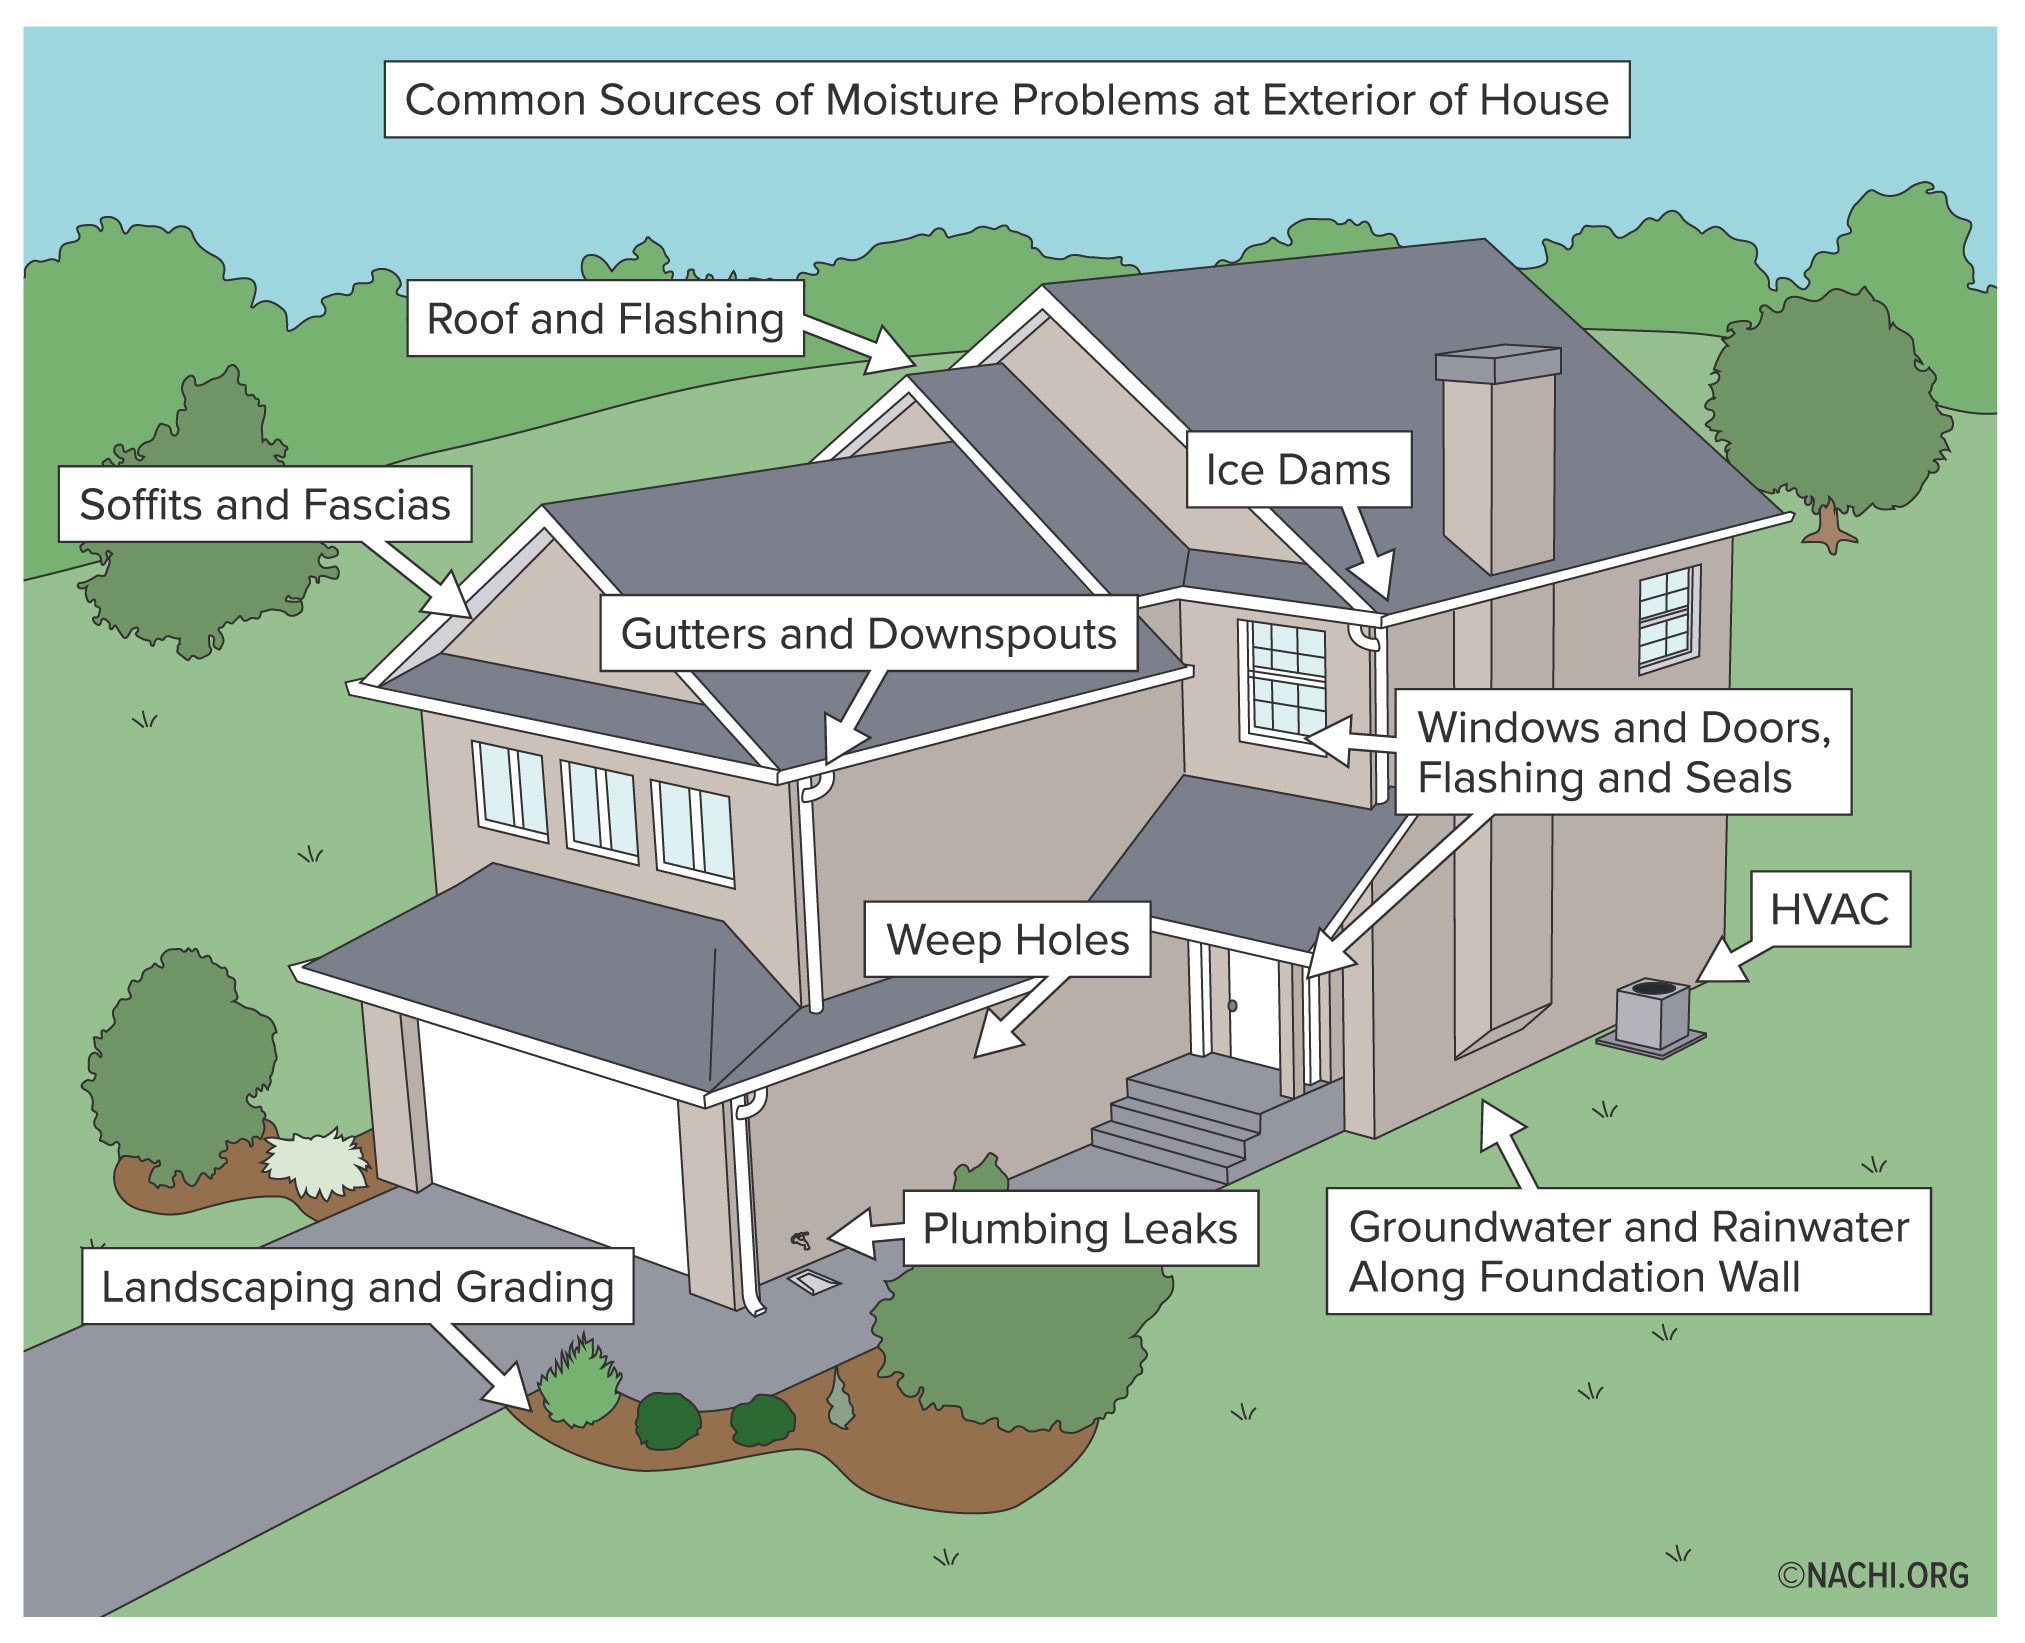 Common sources of moisture problems at the exterior of a house.